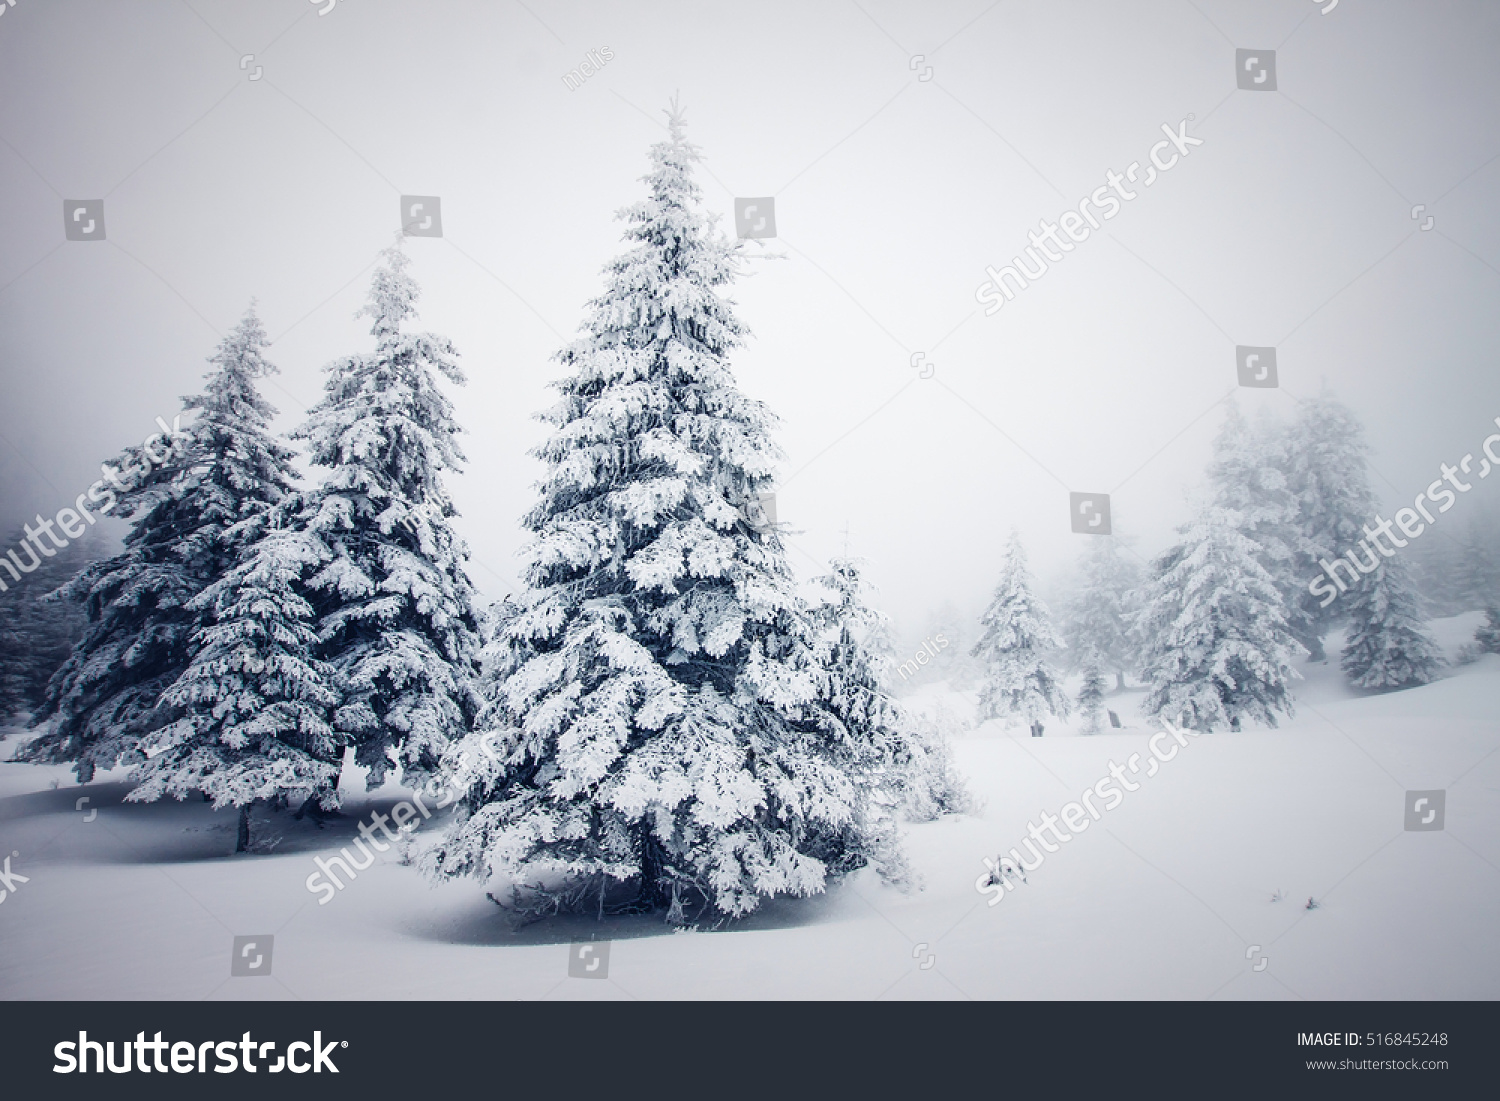 Trees covered with hoarfrost and snow in winter mountains Christmas snowy background